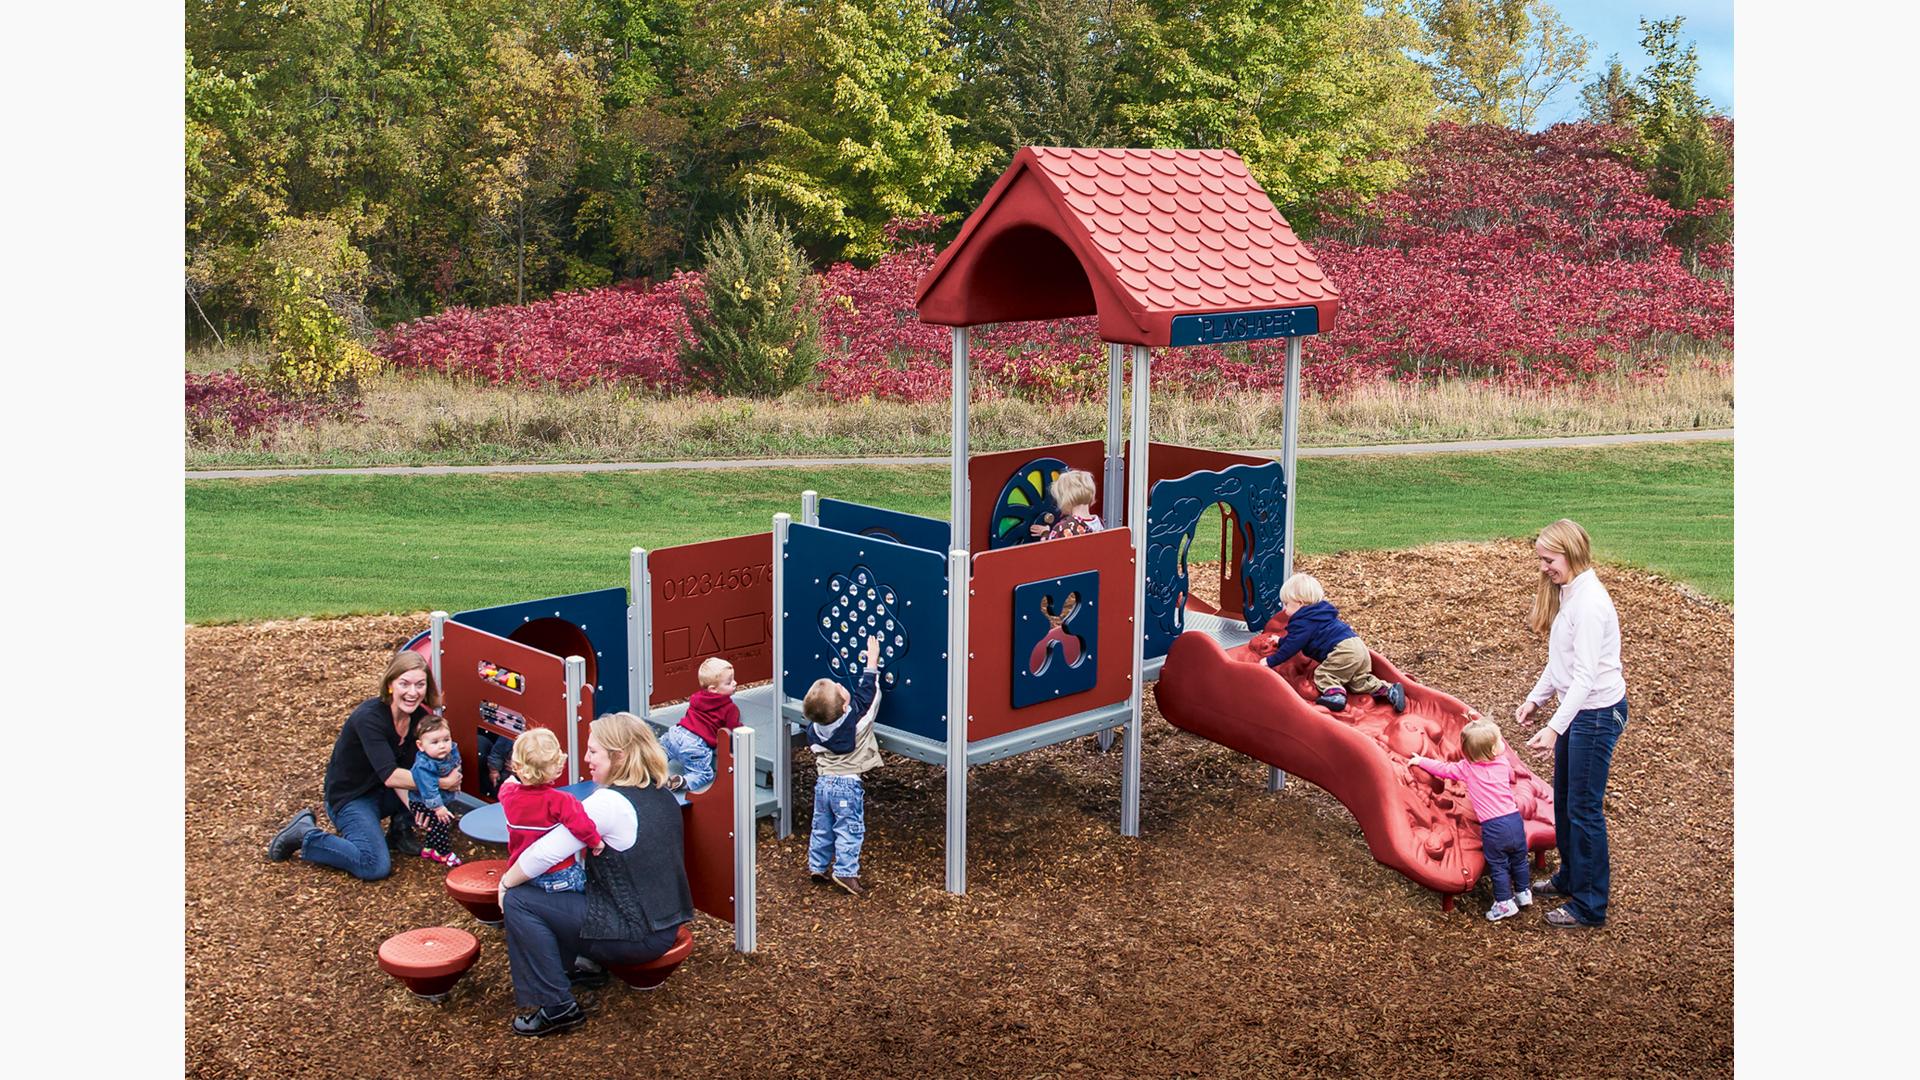 Mothers play with their children on a toddler accessible playground structure.  